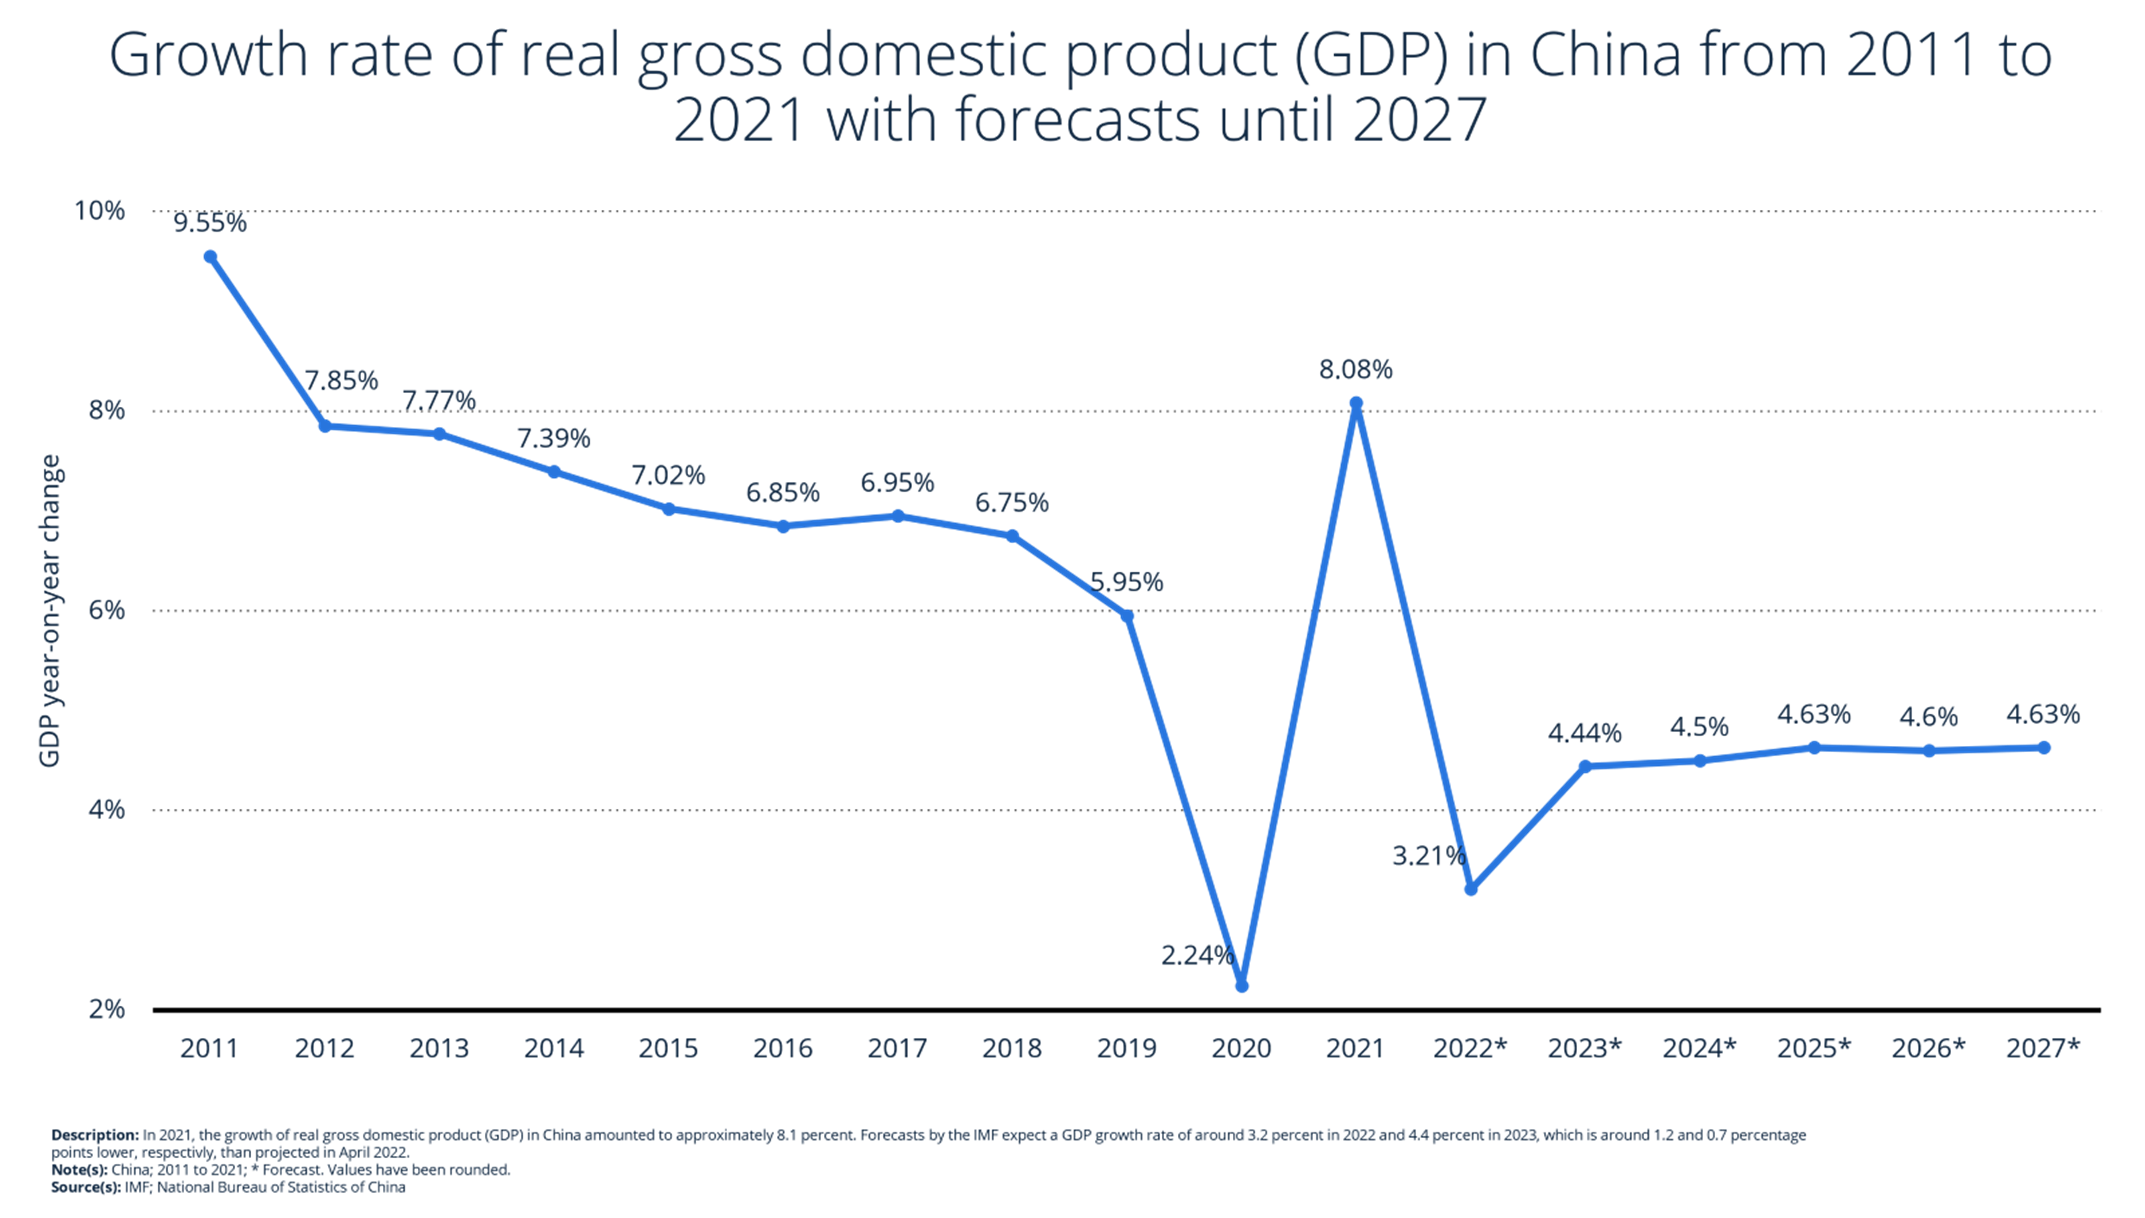 Growth rate of real gross domestic product (GDP) in China from 2011 to 2021 with forecasts until 2027